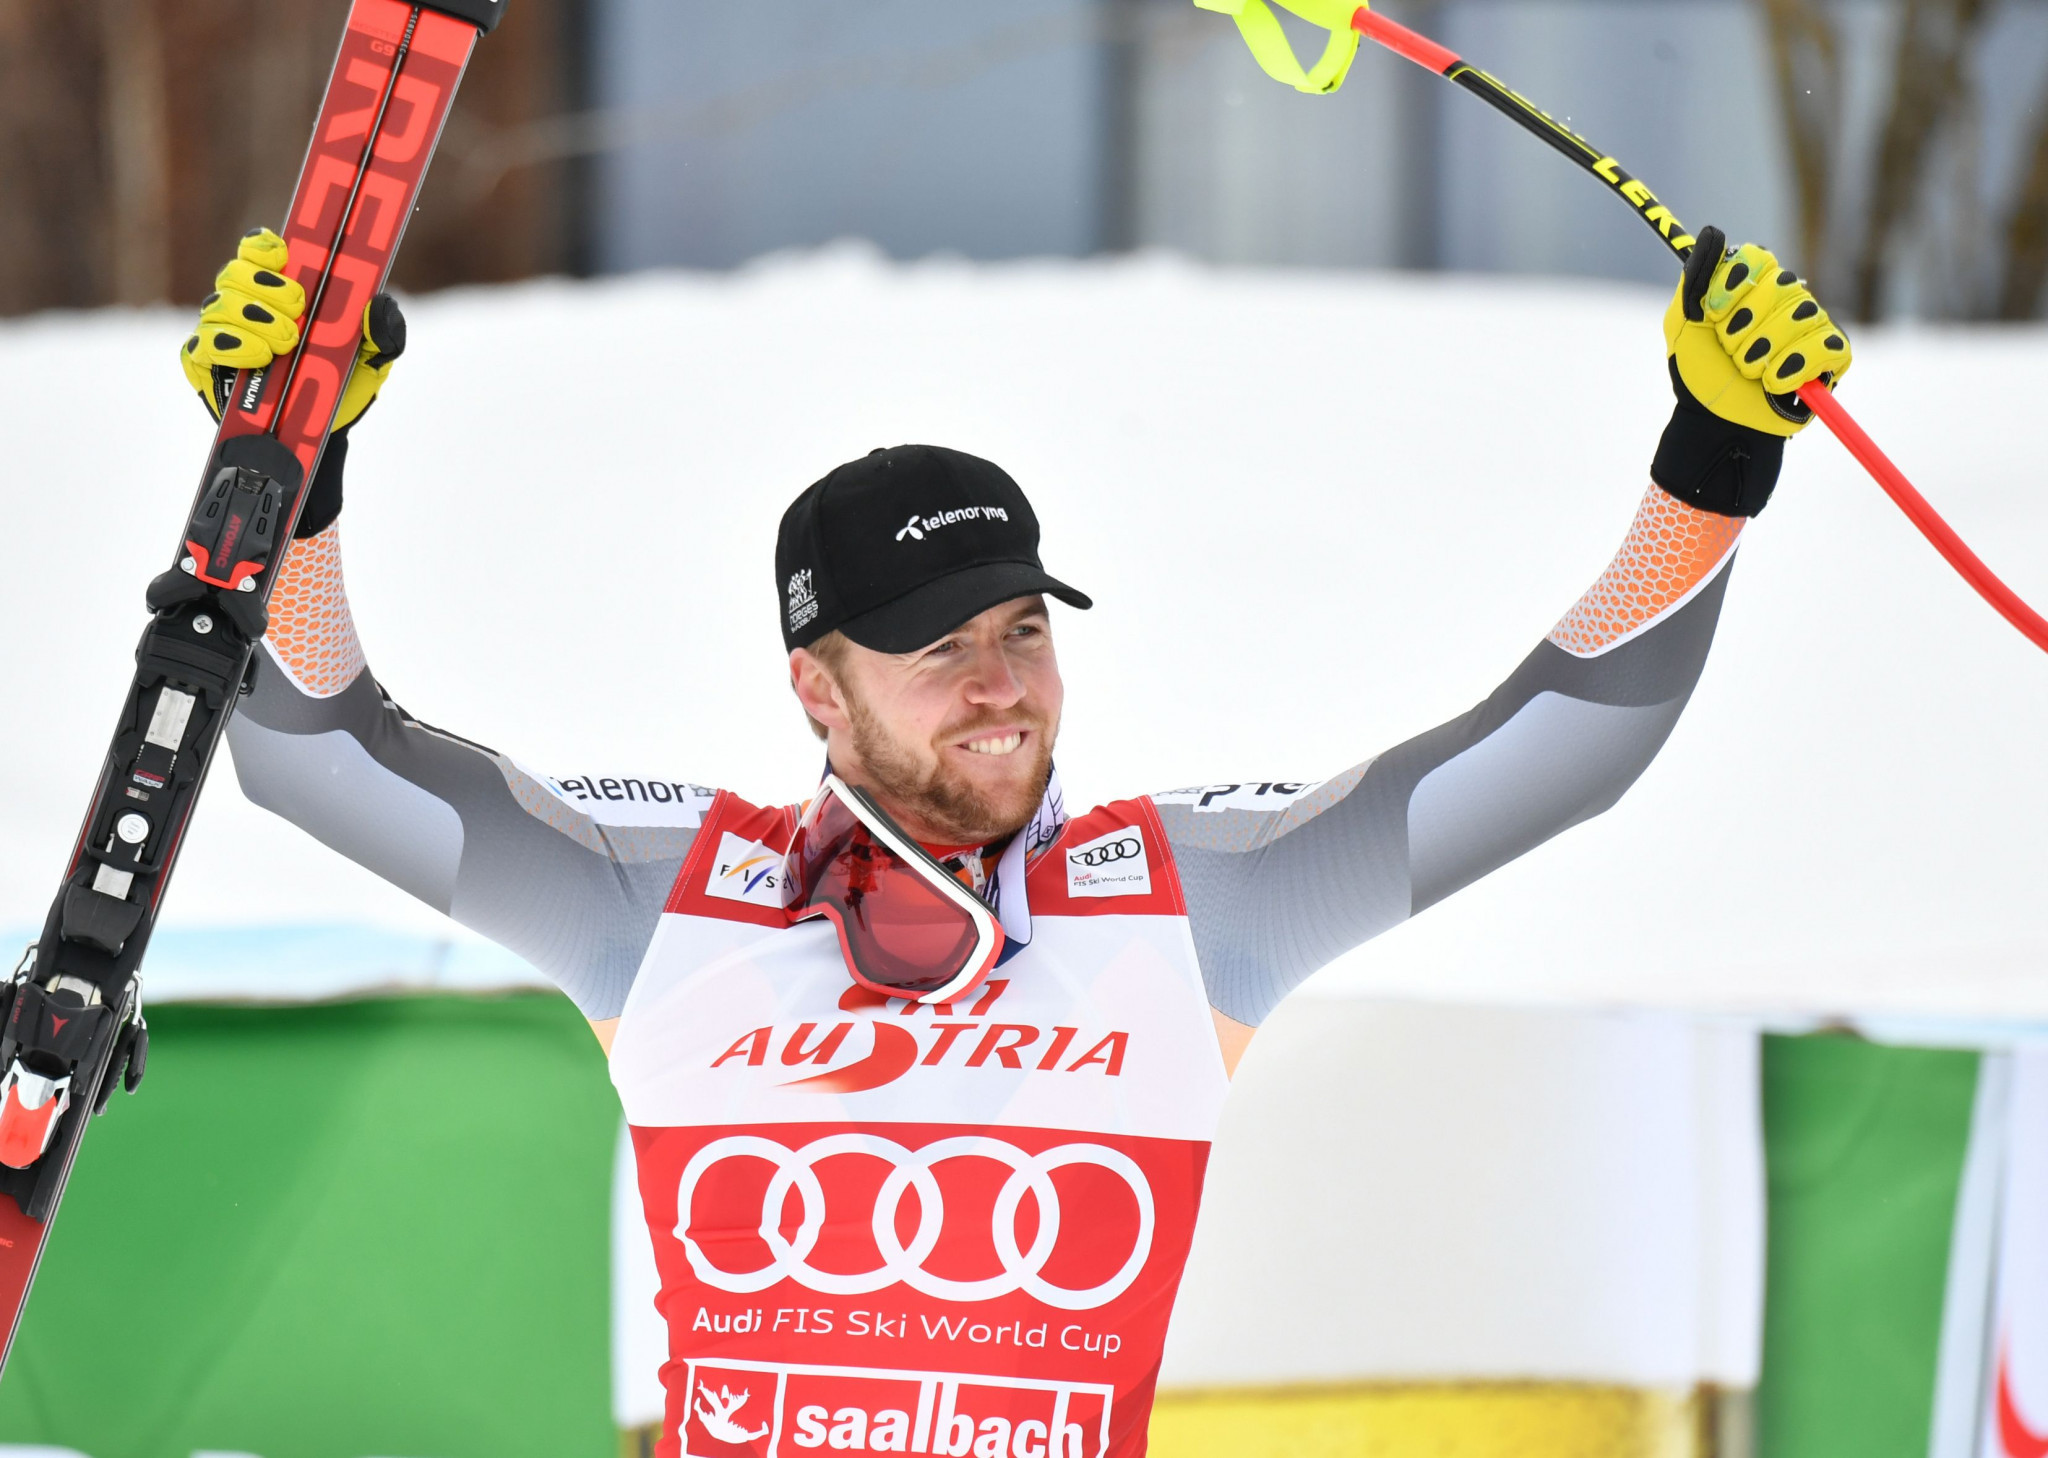 Kilde claims first win of season to take overall FIS Alpine Ski World Cup lead